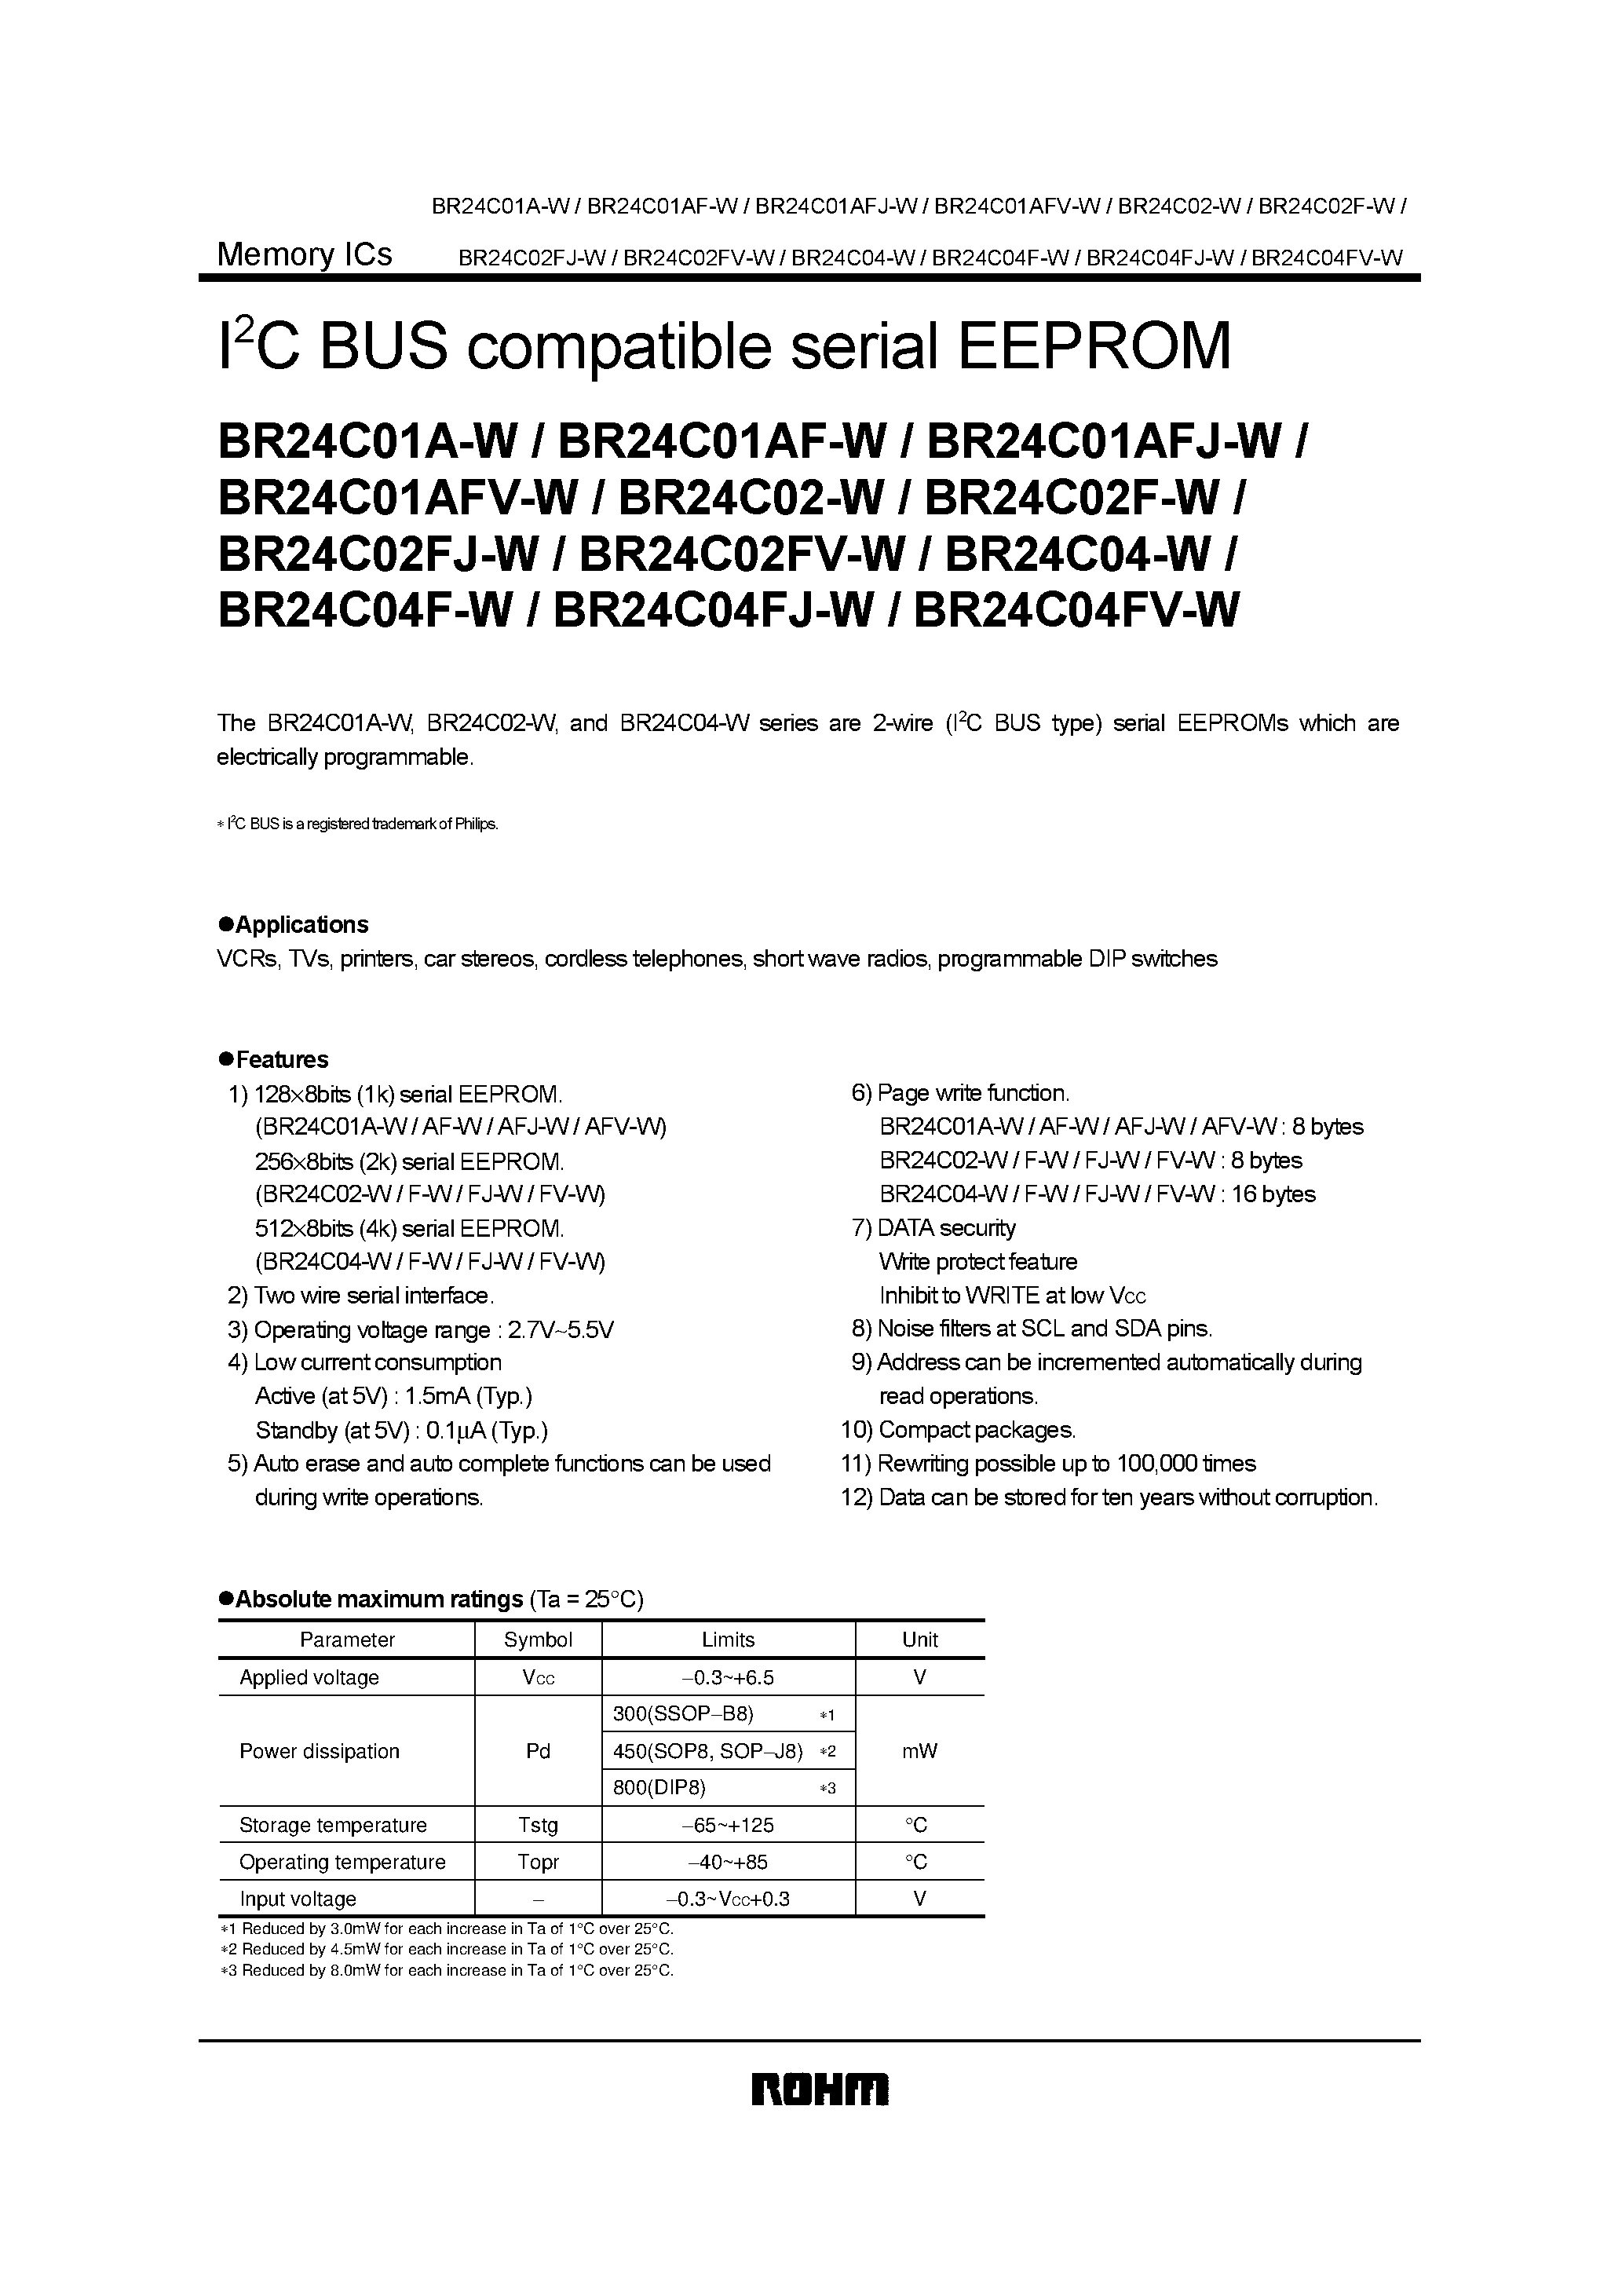 Datasheet BR24C02-W - I2C BUS compatible serial EEPROM page 1